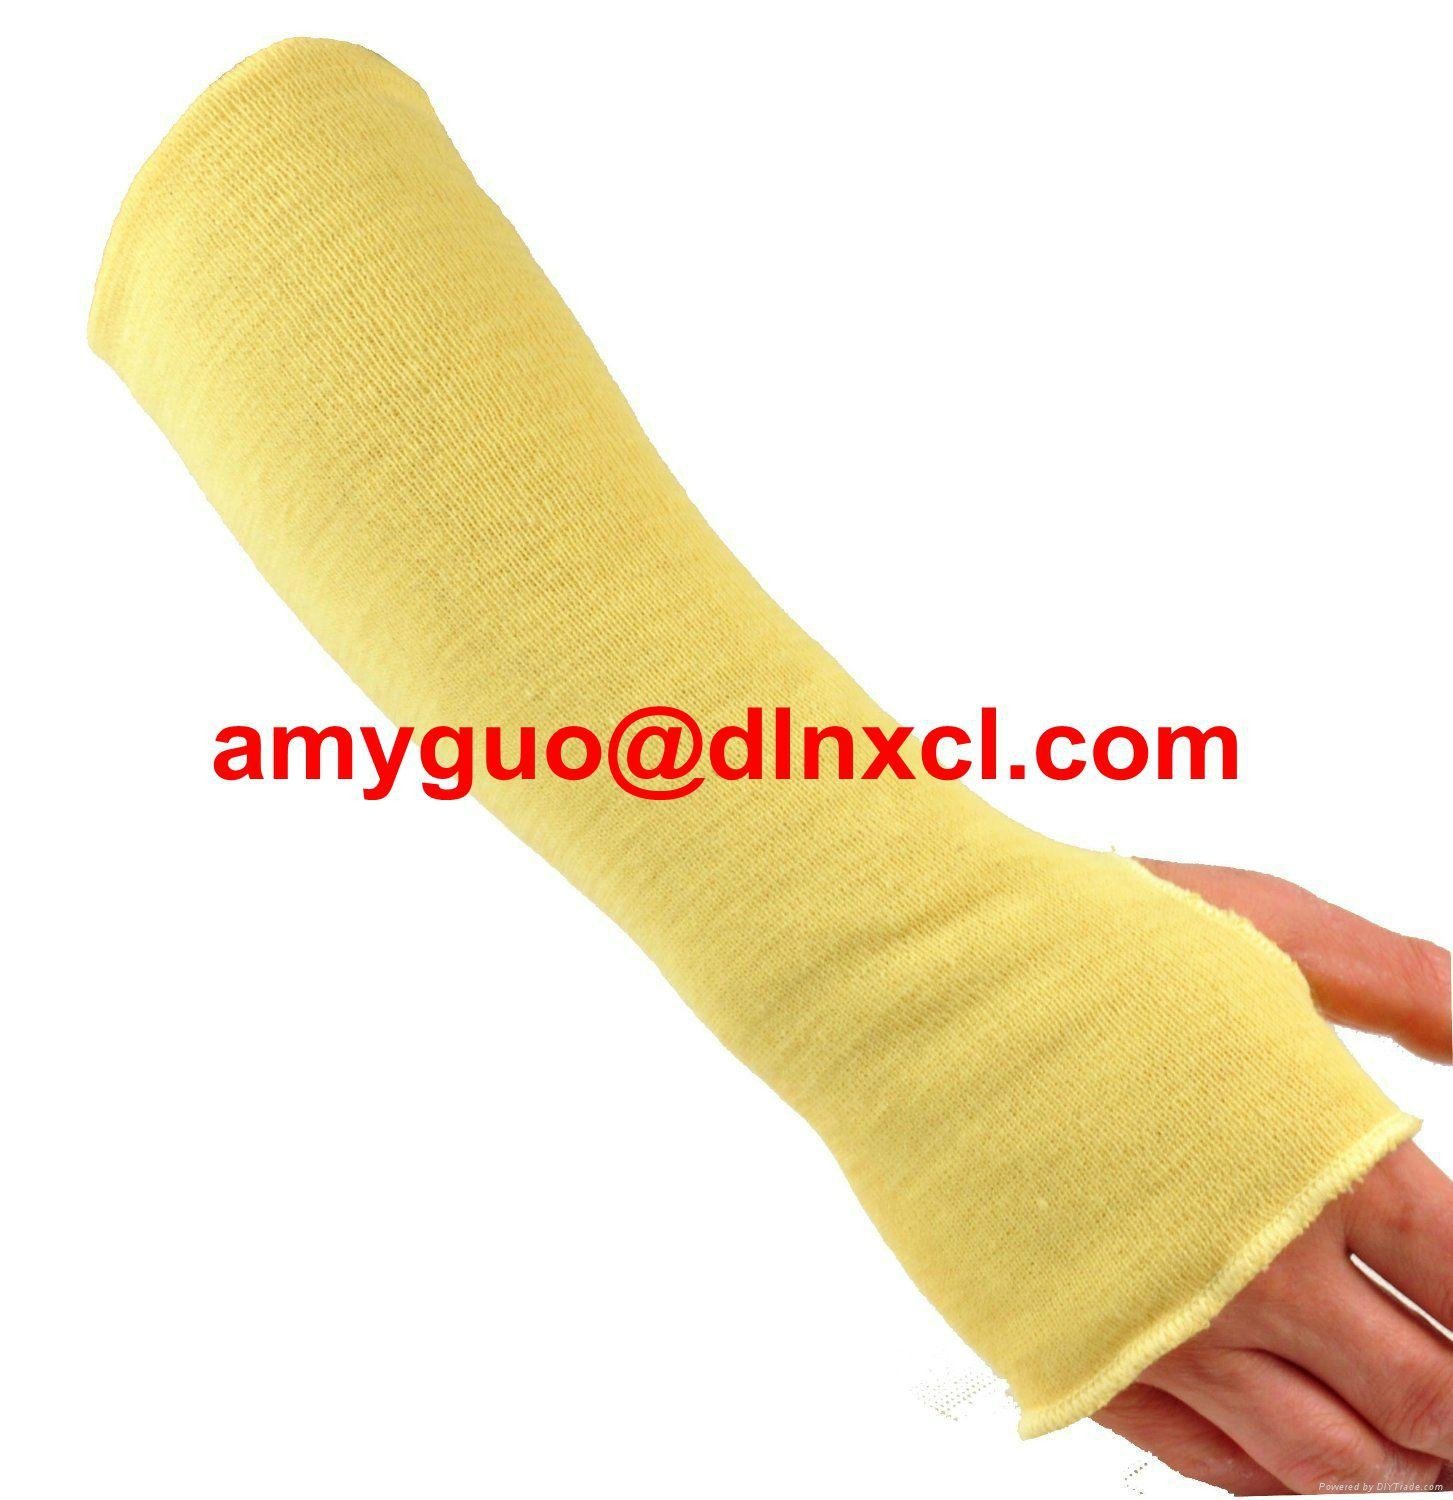 500 ℃ Fire & Cut resistant Kevlar arm sleeve with thumb slot